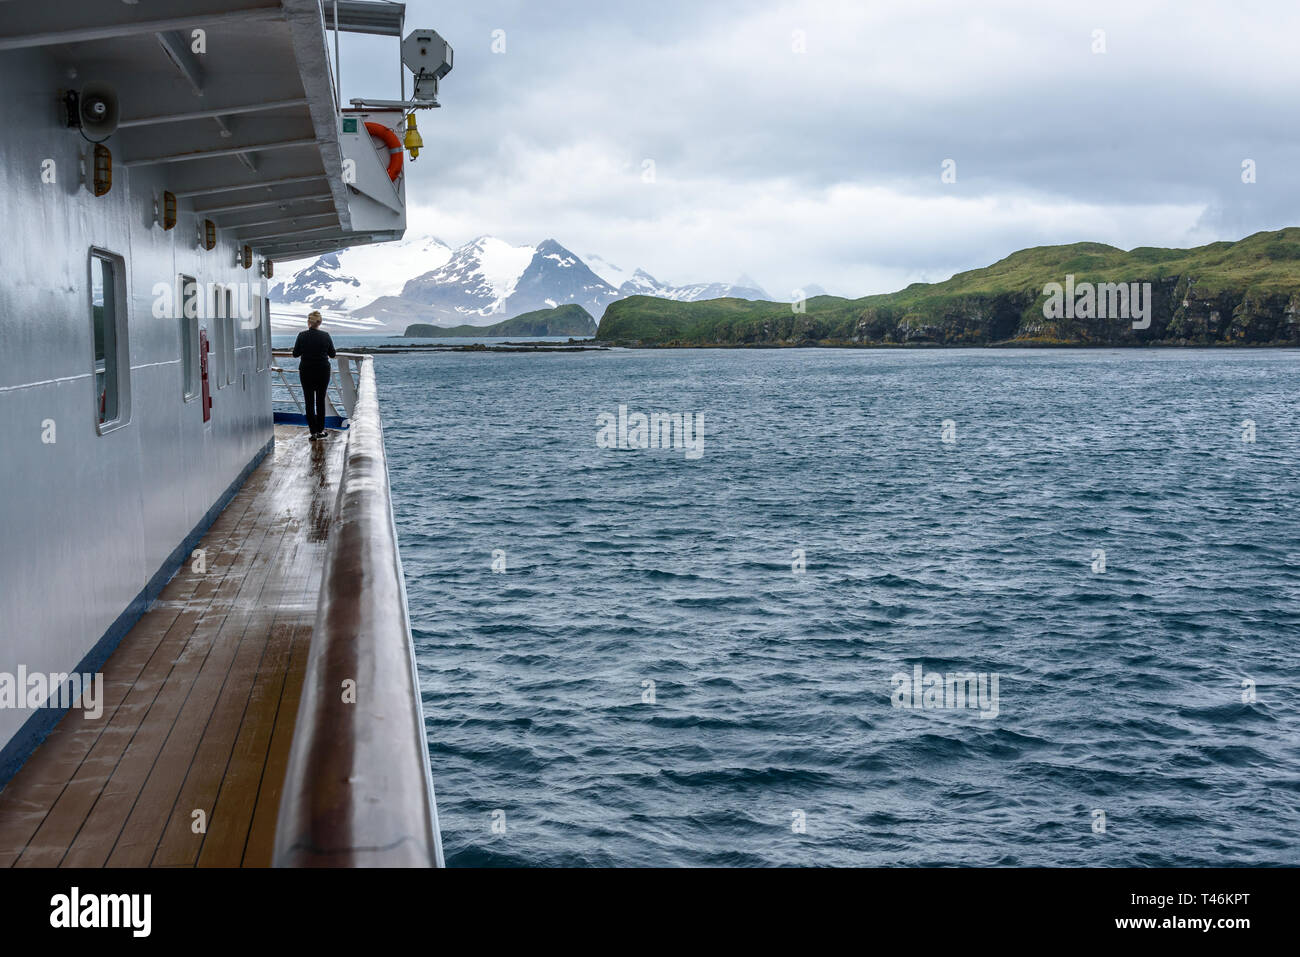 View of Prion Island on a cloudy day from outside deck of cruise ship, South Georgia, Atlantic Ocean Stock Photo